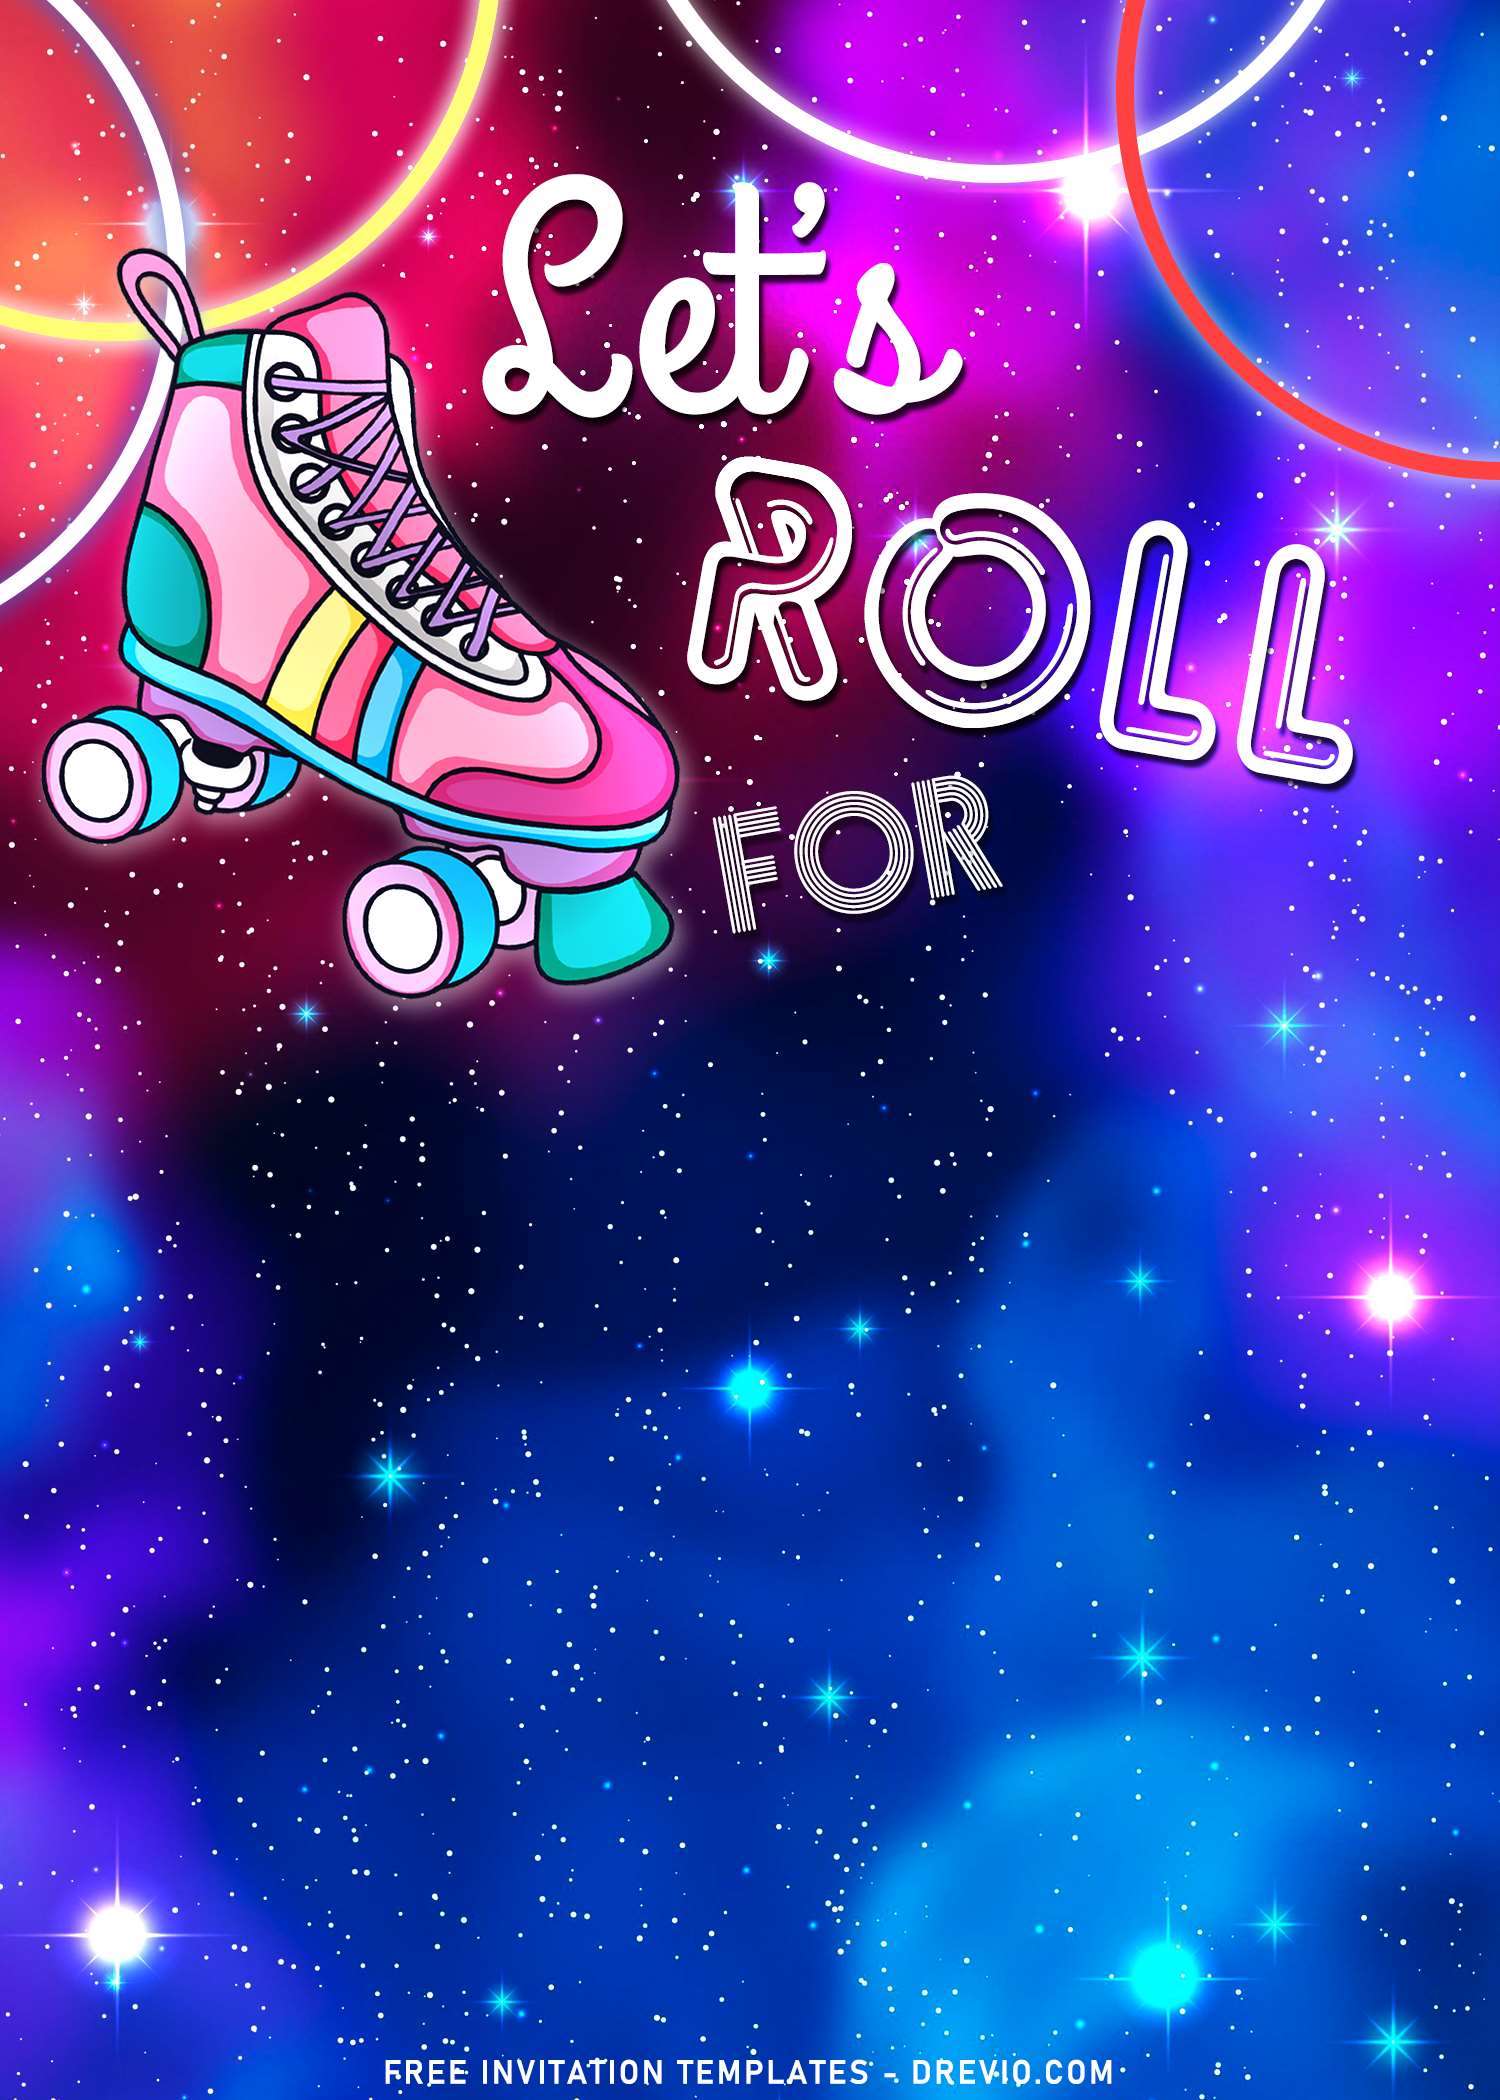 7+ let's roll roller skate party invitation templates | download